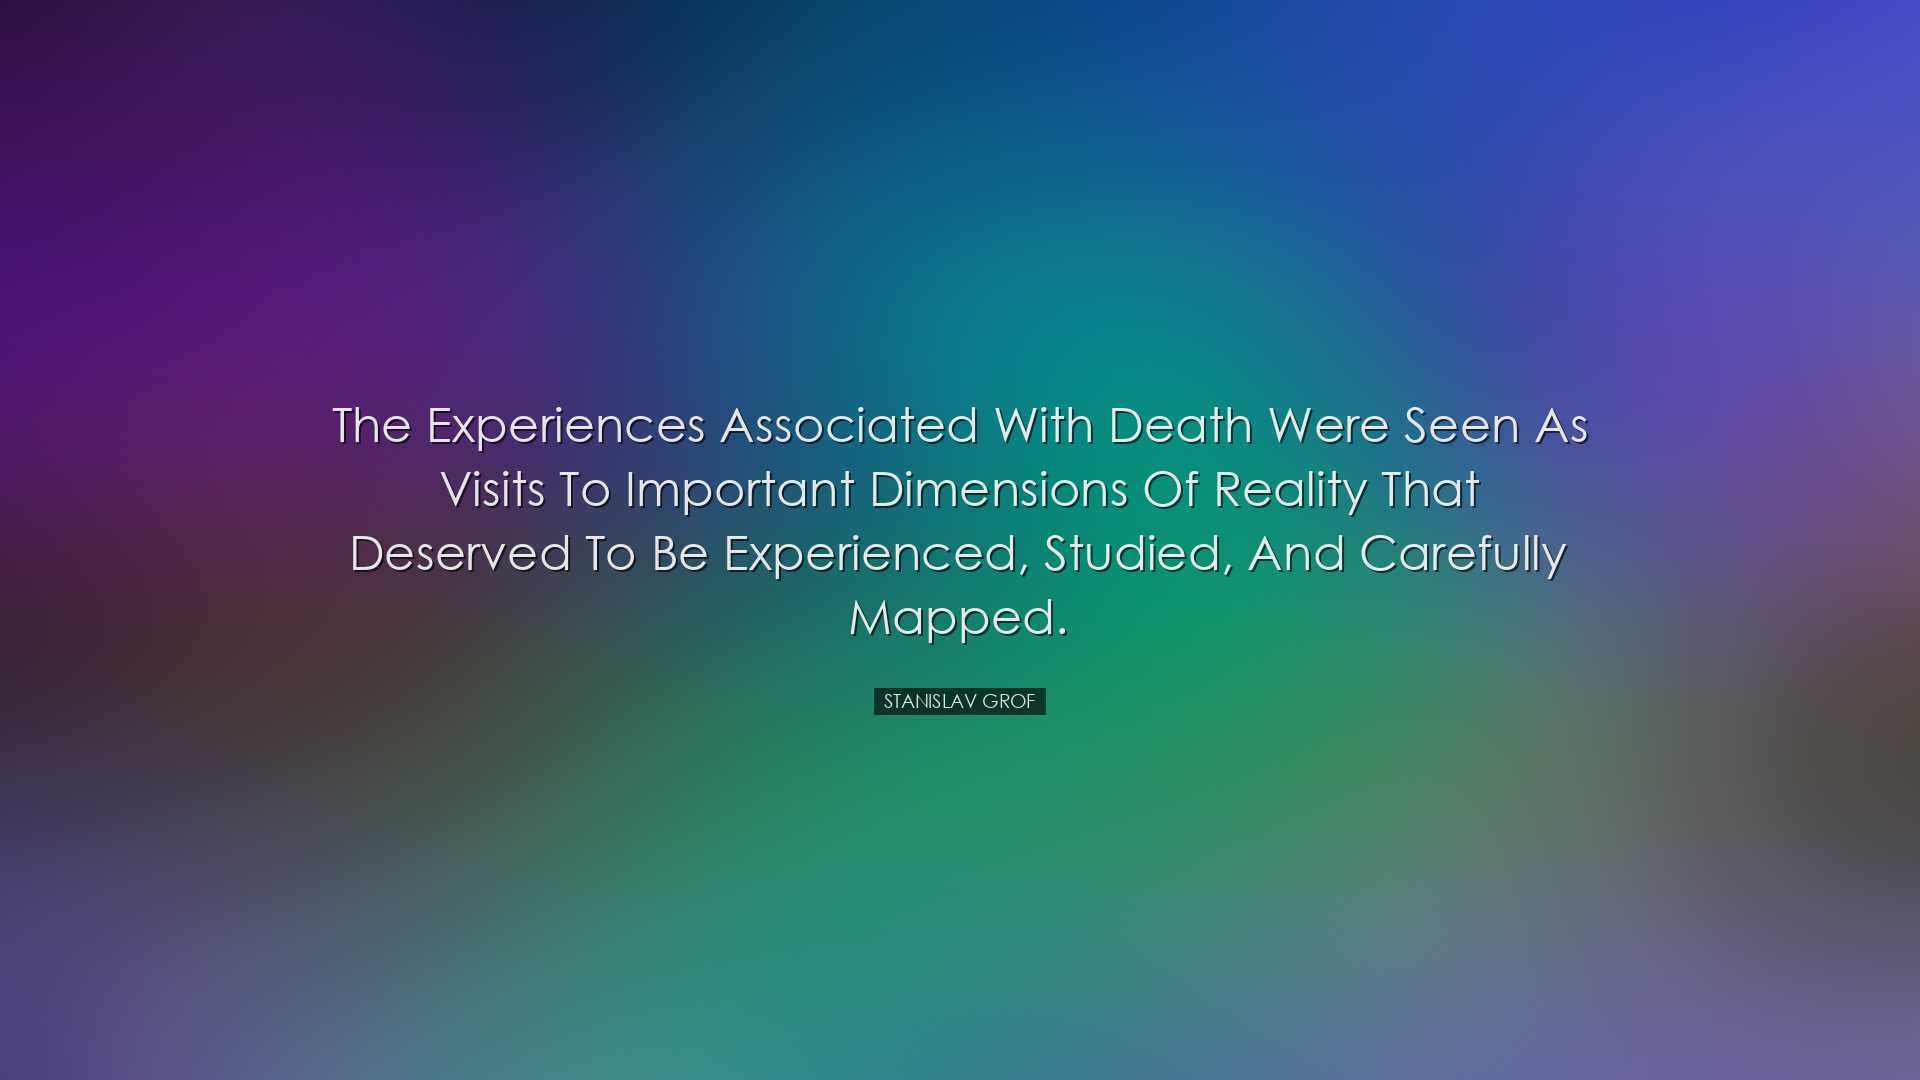 The experiences associated with death were seen as visits to impor